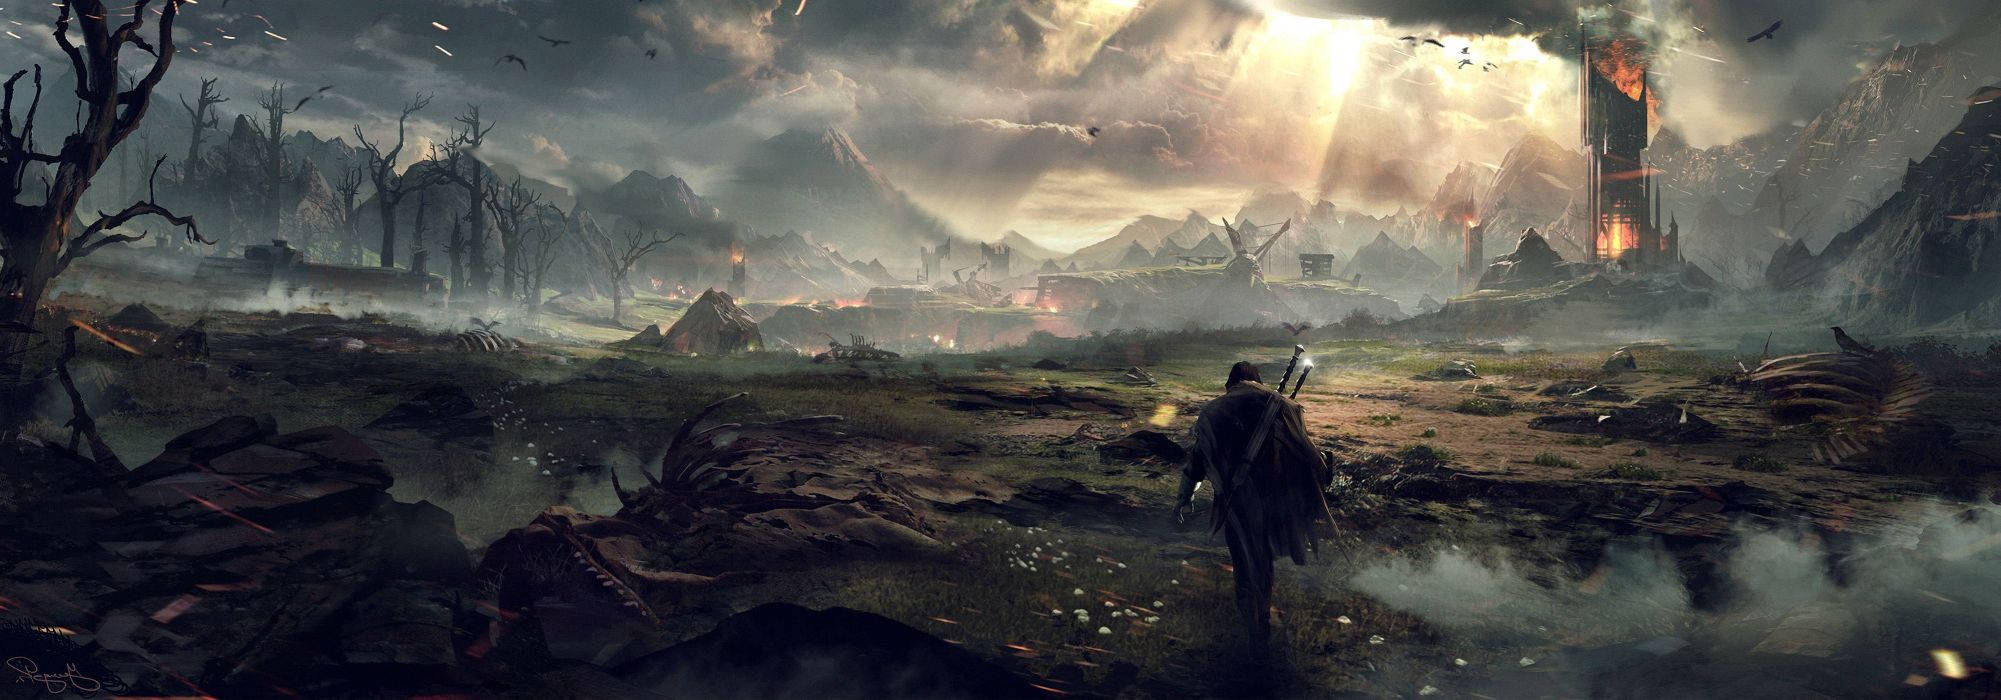 A Fantasy Landscape With A Man Standing In The Middle Of It Background